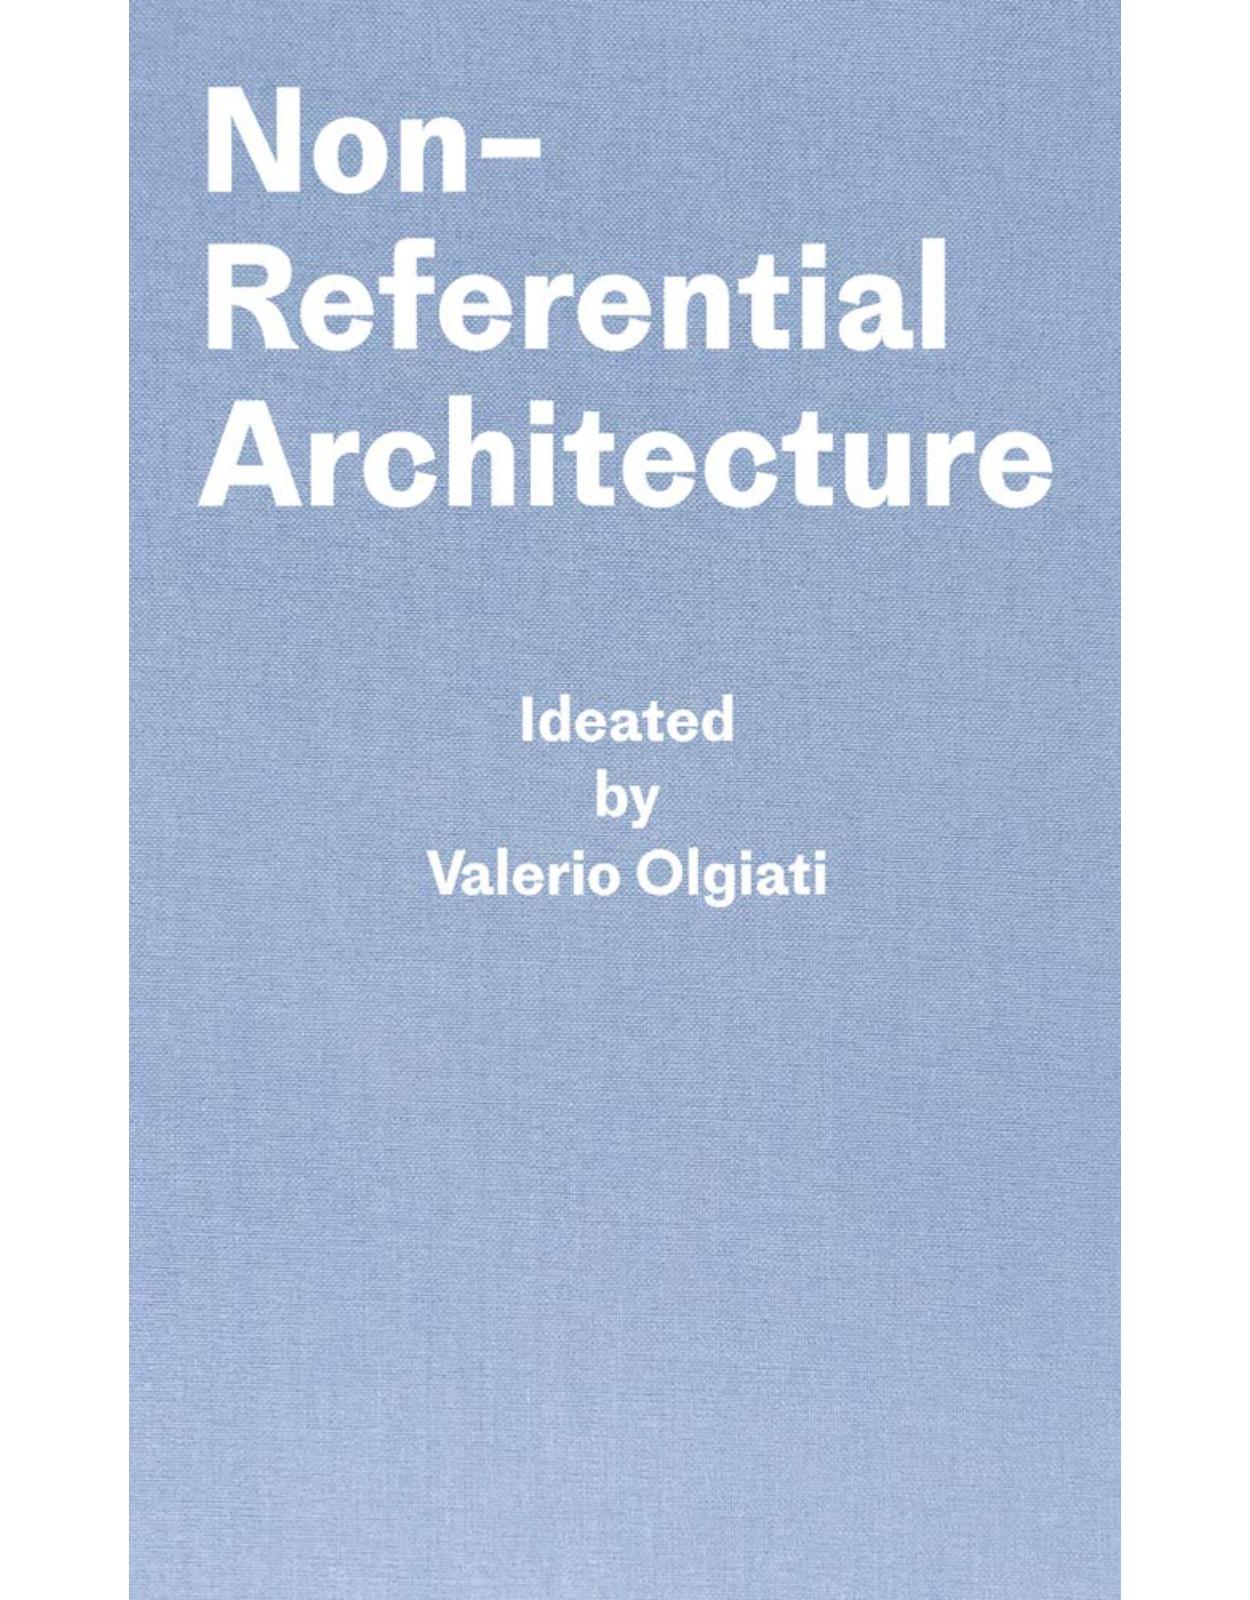 Non-Referential Architecture: Ideated by Valerio Olgiati - Written by Markus Breitschmid